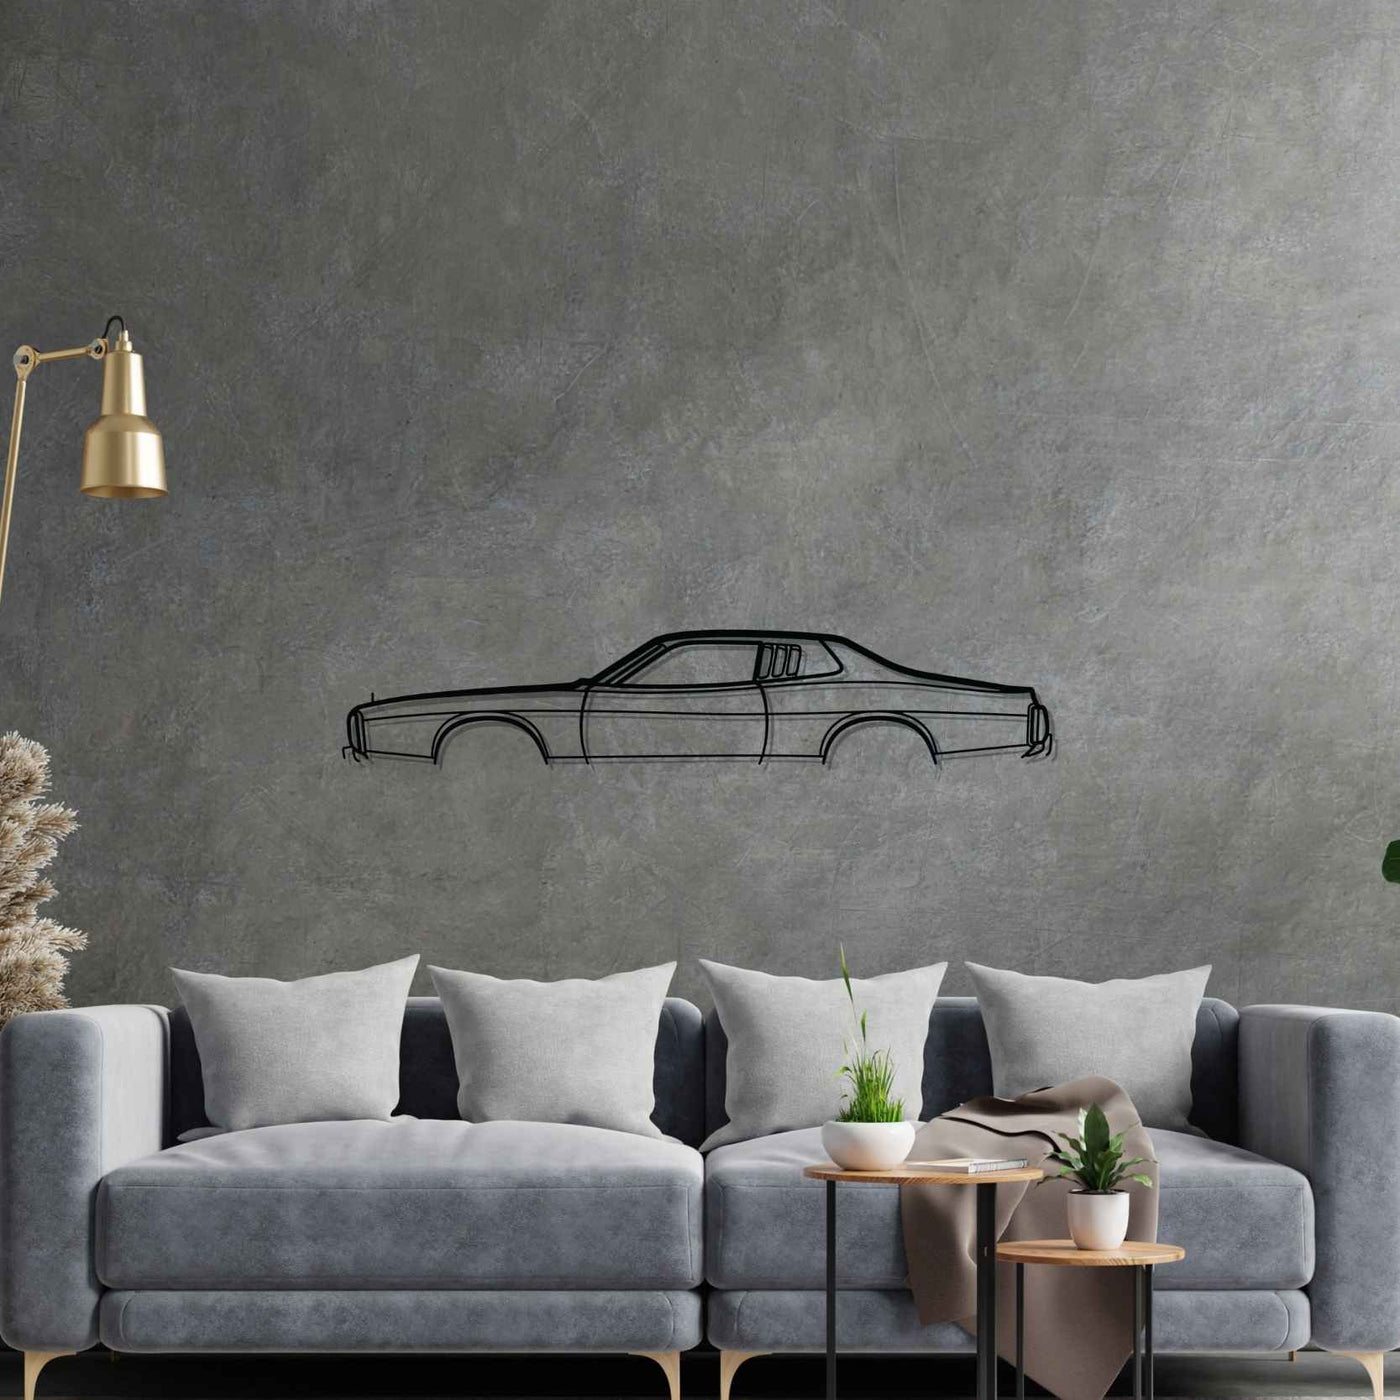 Charger SE 1973 Classic Silhouette Metal Wall Art